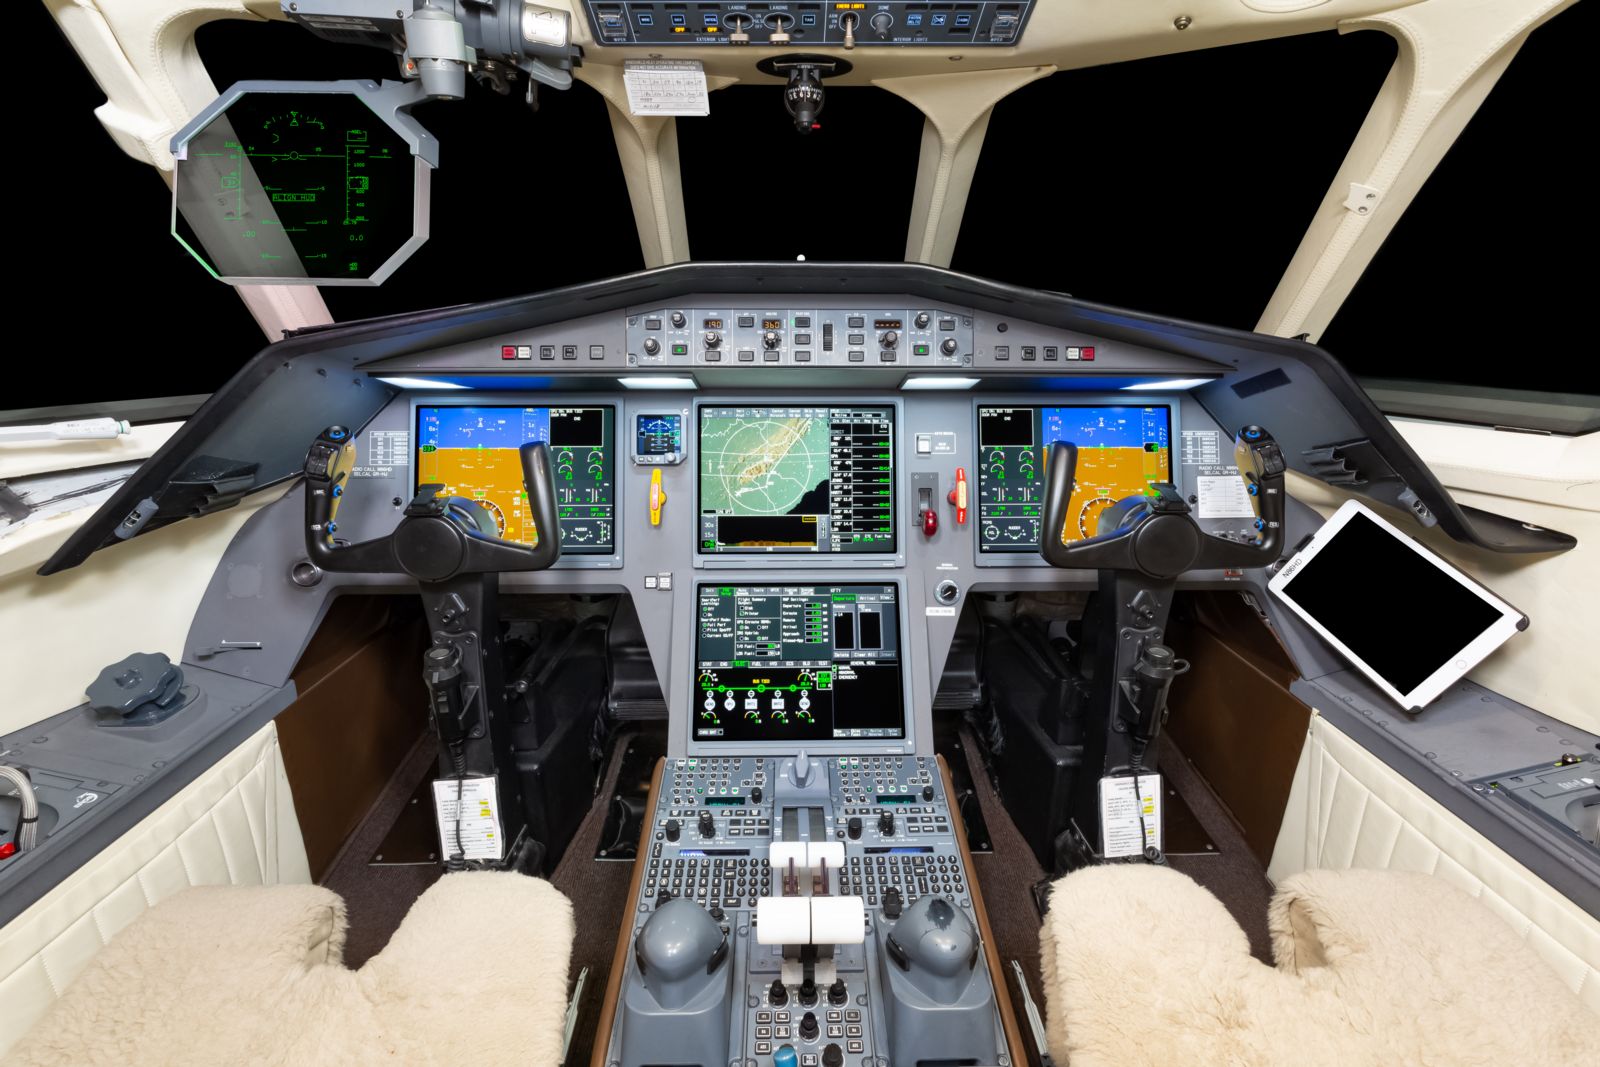 Dassault Falcon 2000LX  S/N 250 for sale | gallery image: /userfiles/files/bfp_8747.jpg